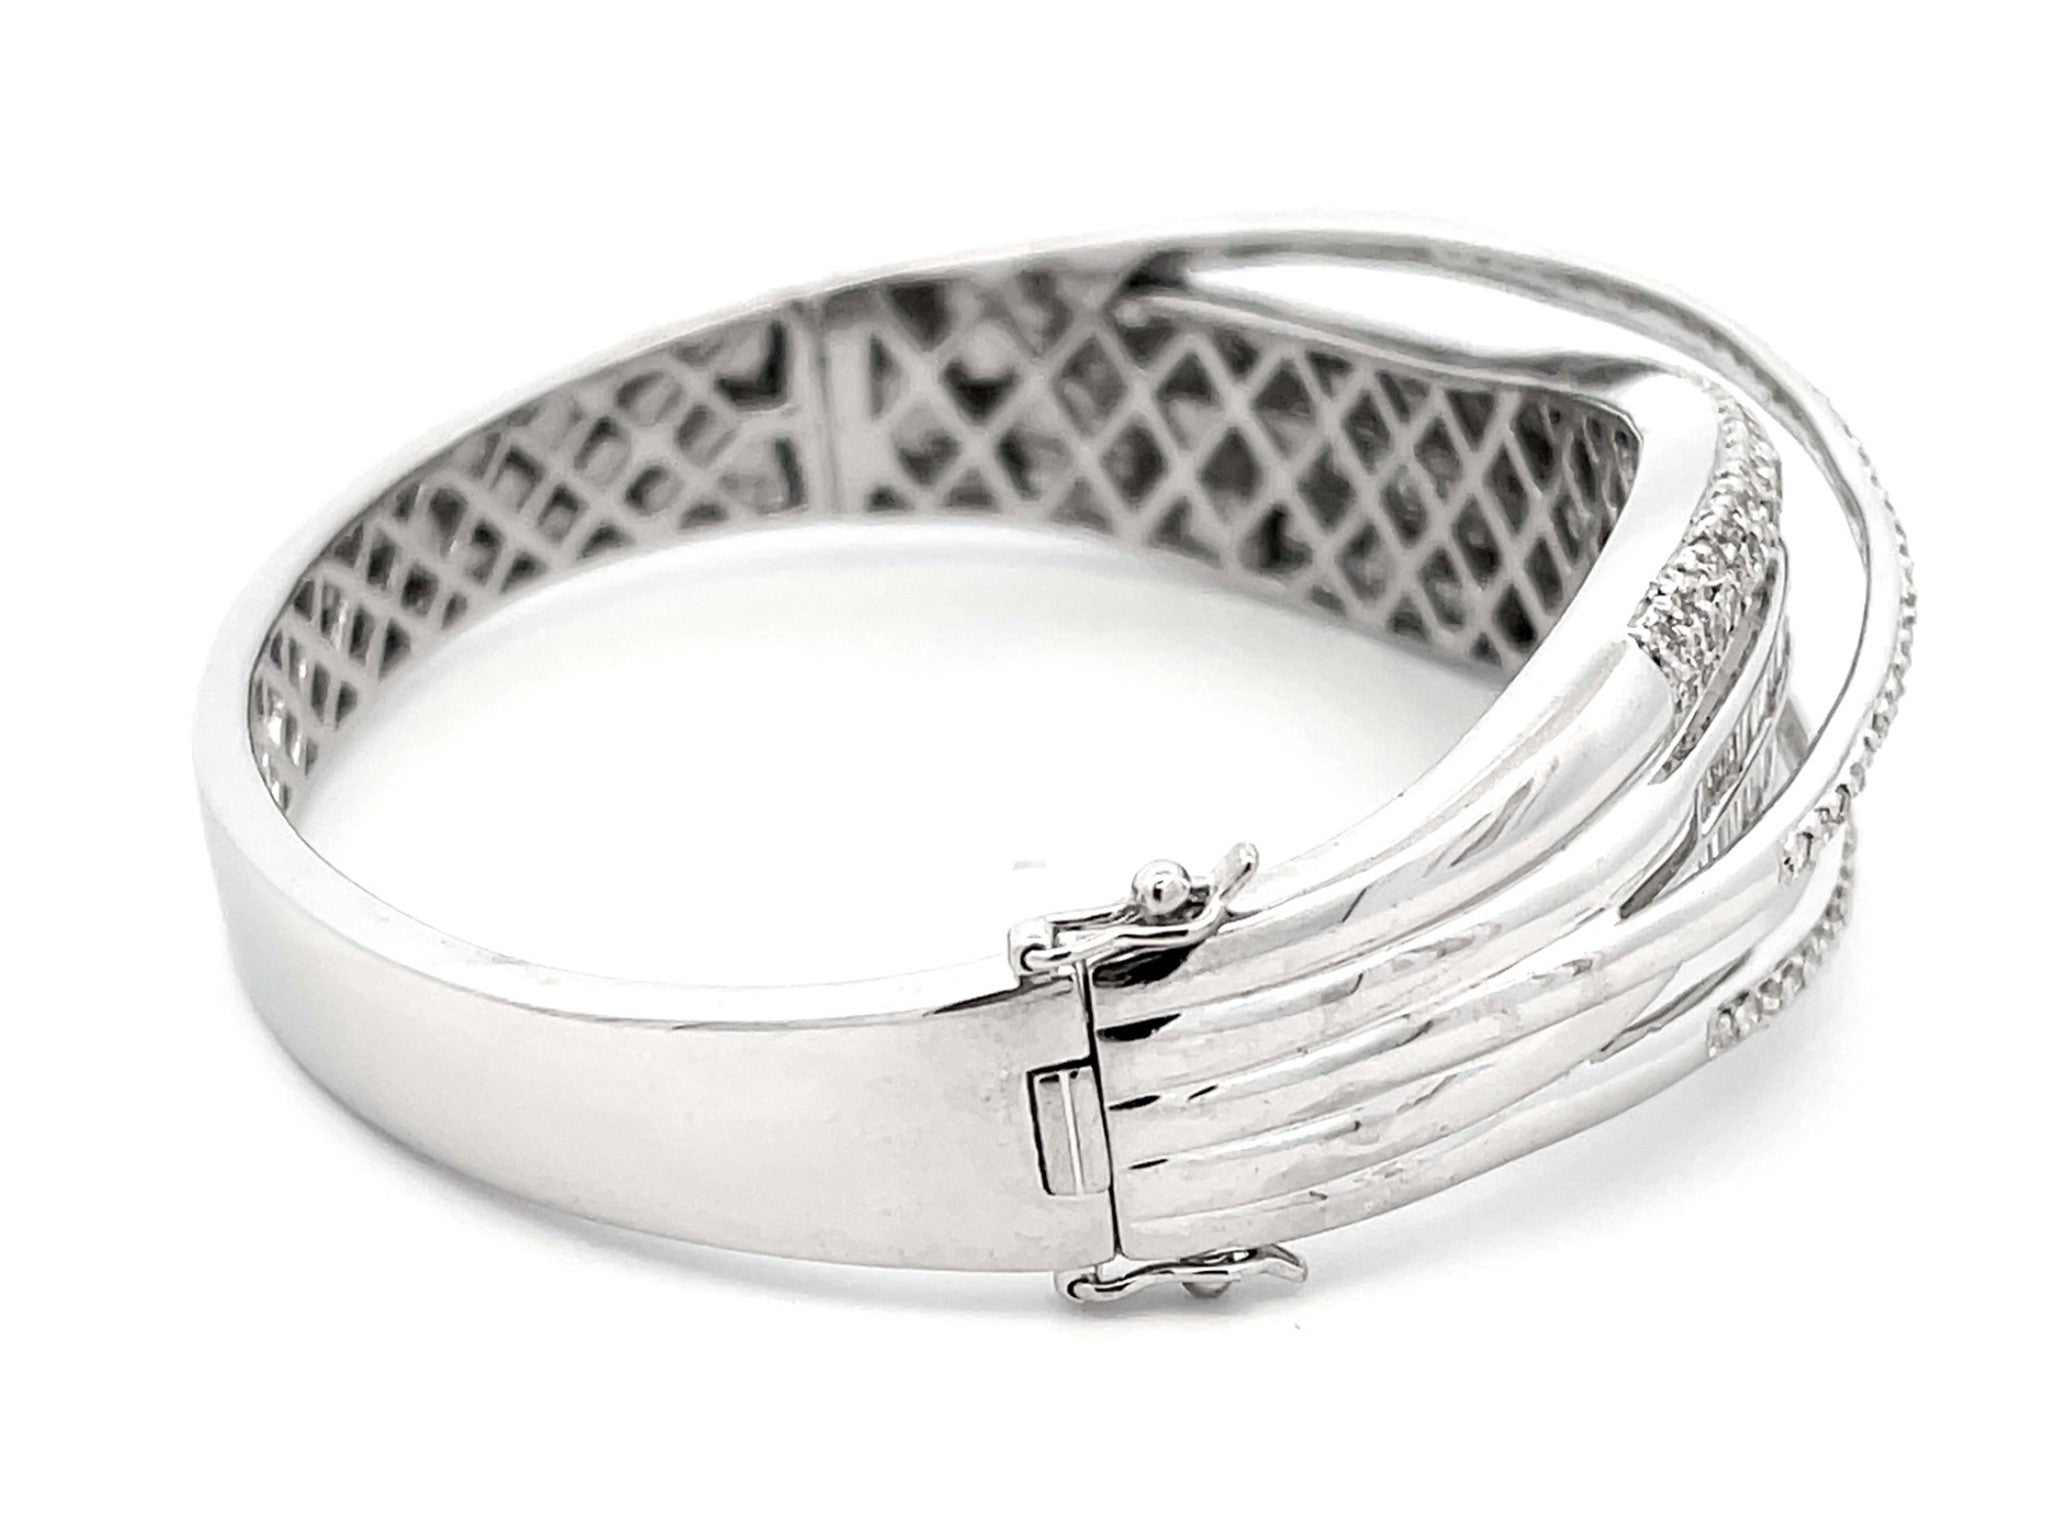 Baguette and Brilliant Cut Diamond Multi Row Hinged Bangle in 18k White Gold